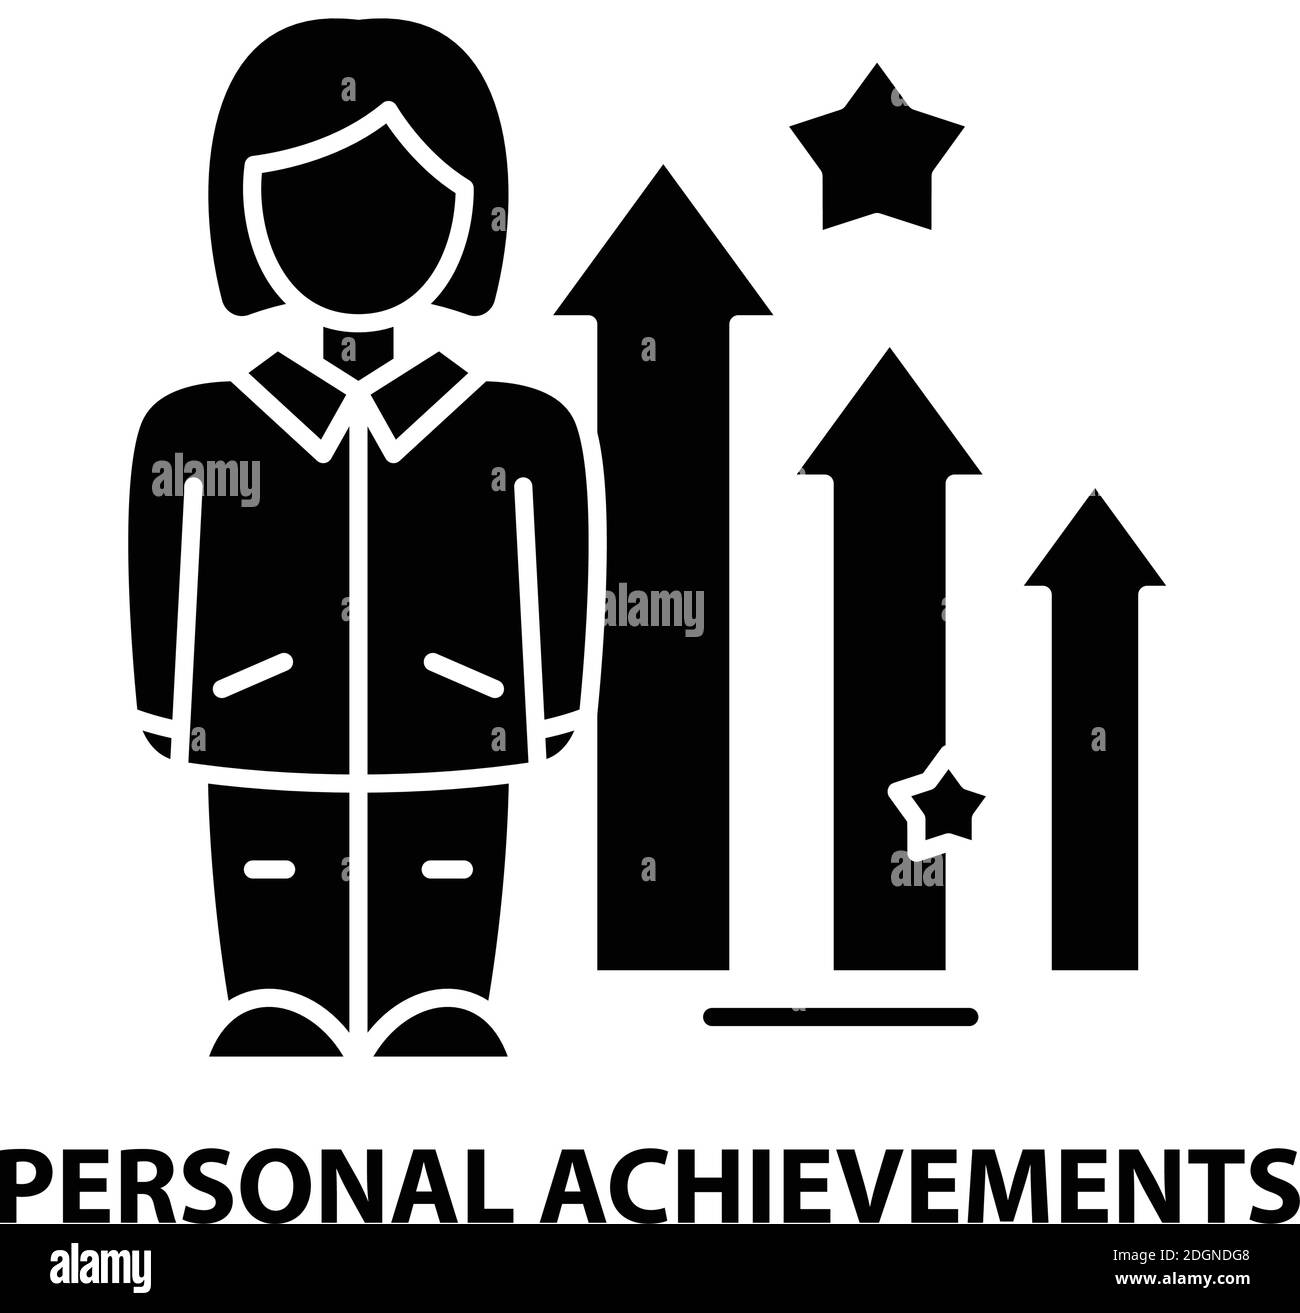 personal achievements icon, black vector sign with editable strokes, concept illustration Stock Vector